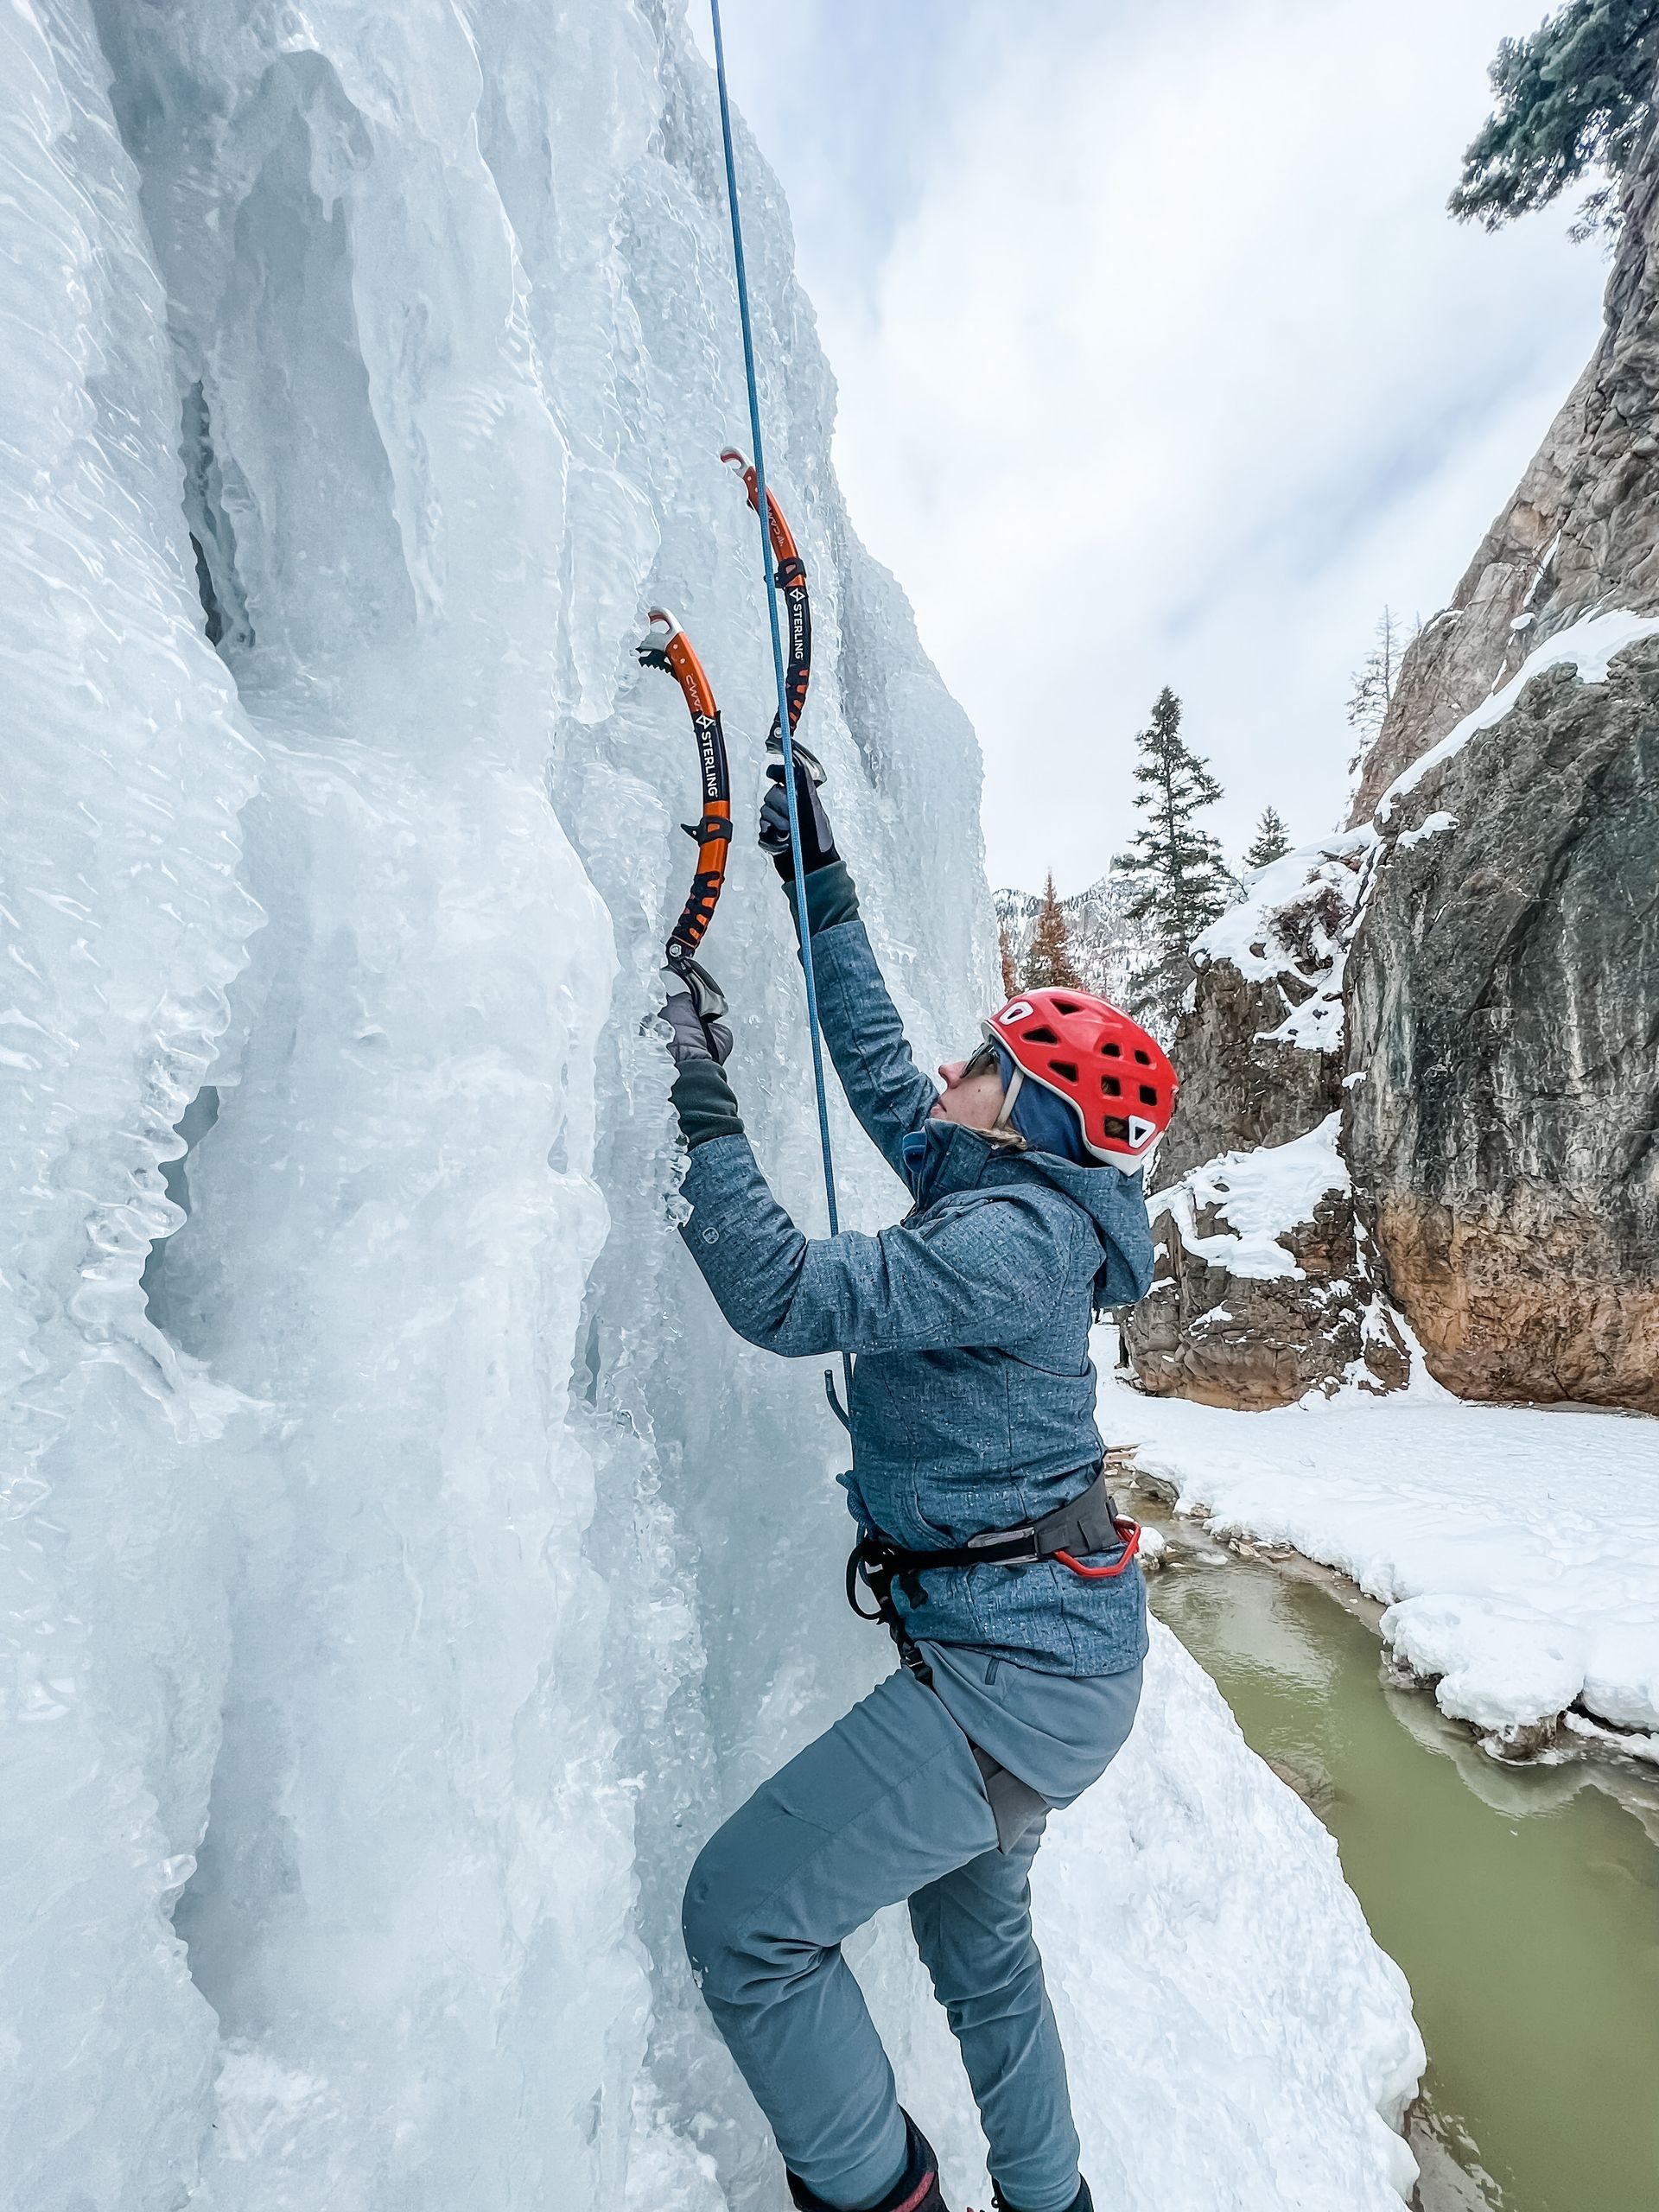 Presley ice climbing at Ouray Ice Park